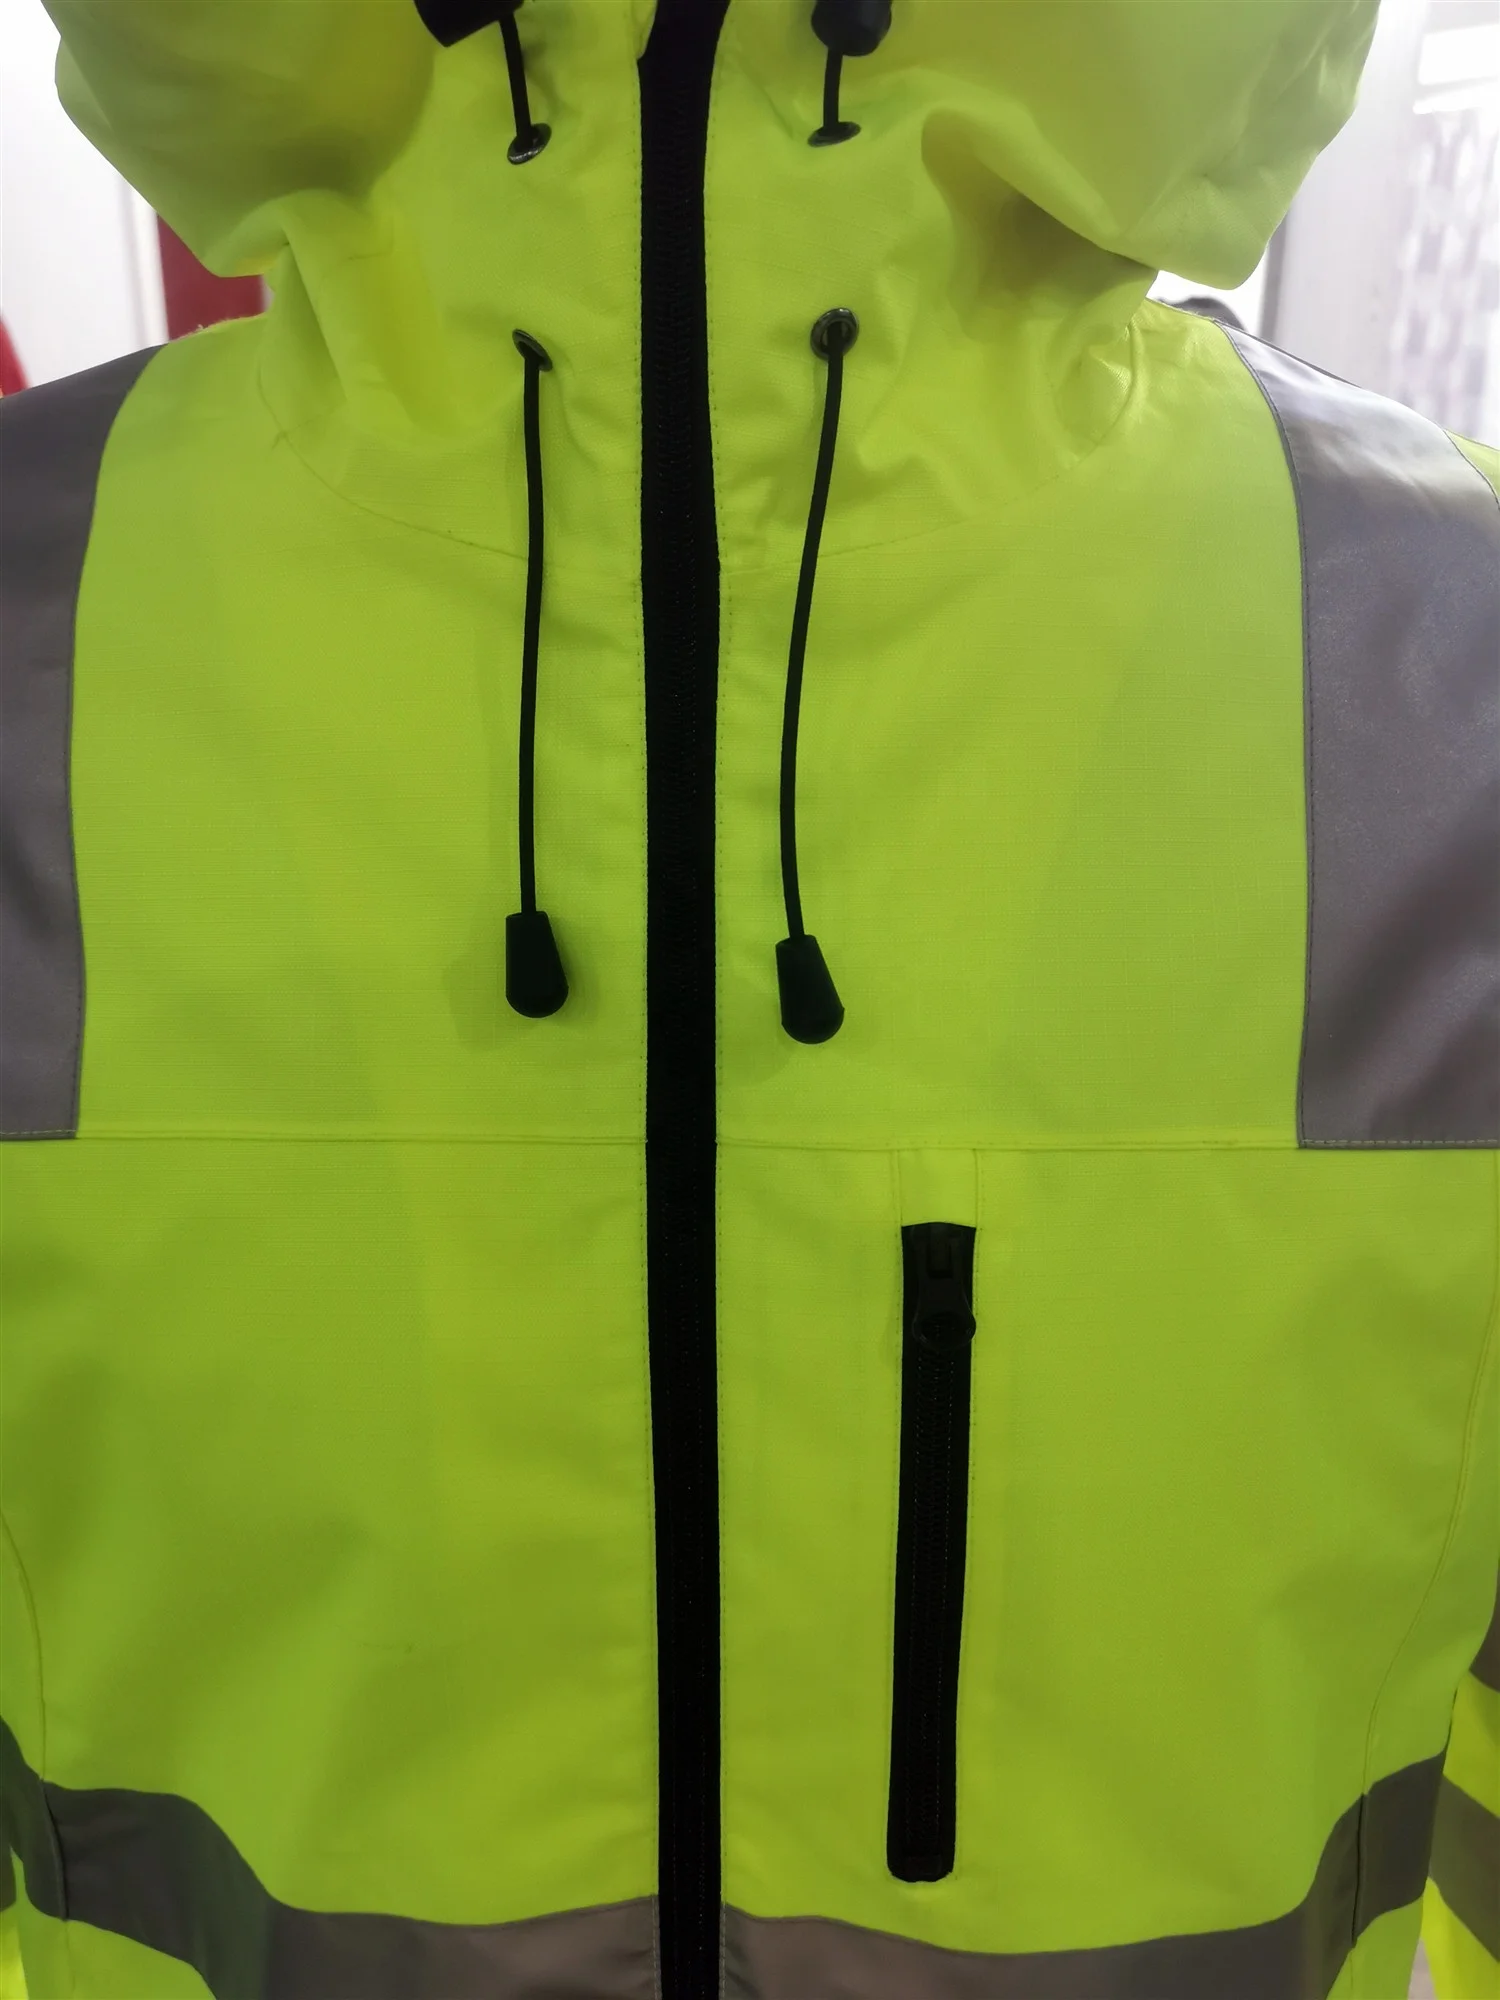 factory reflective high vision safety jacket